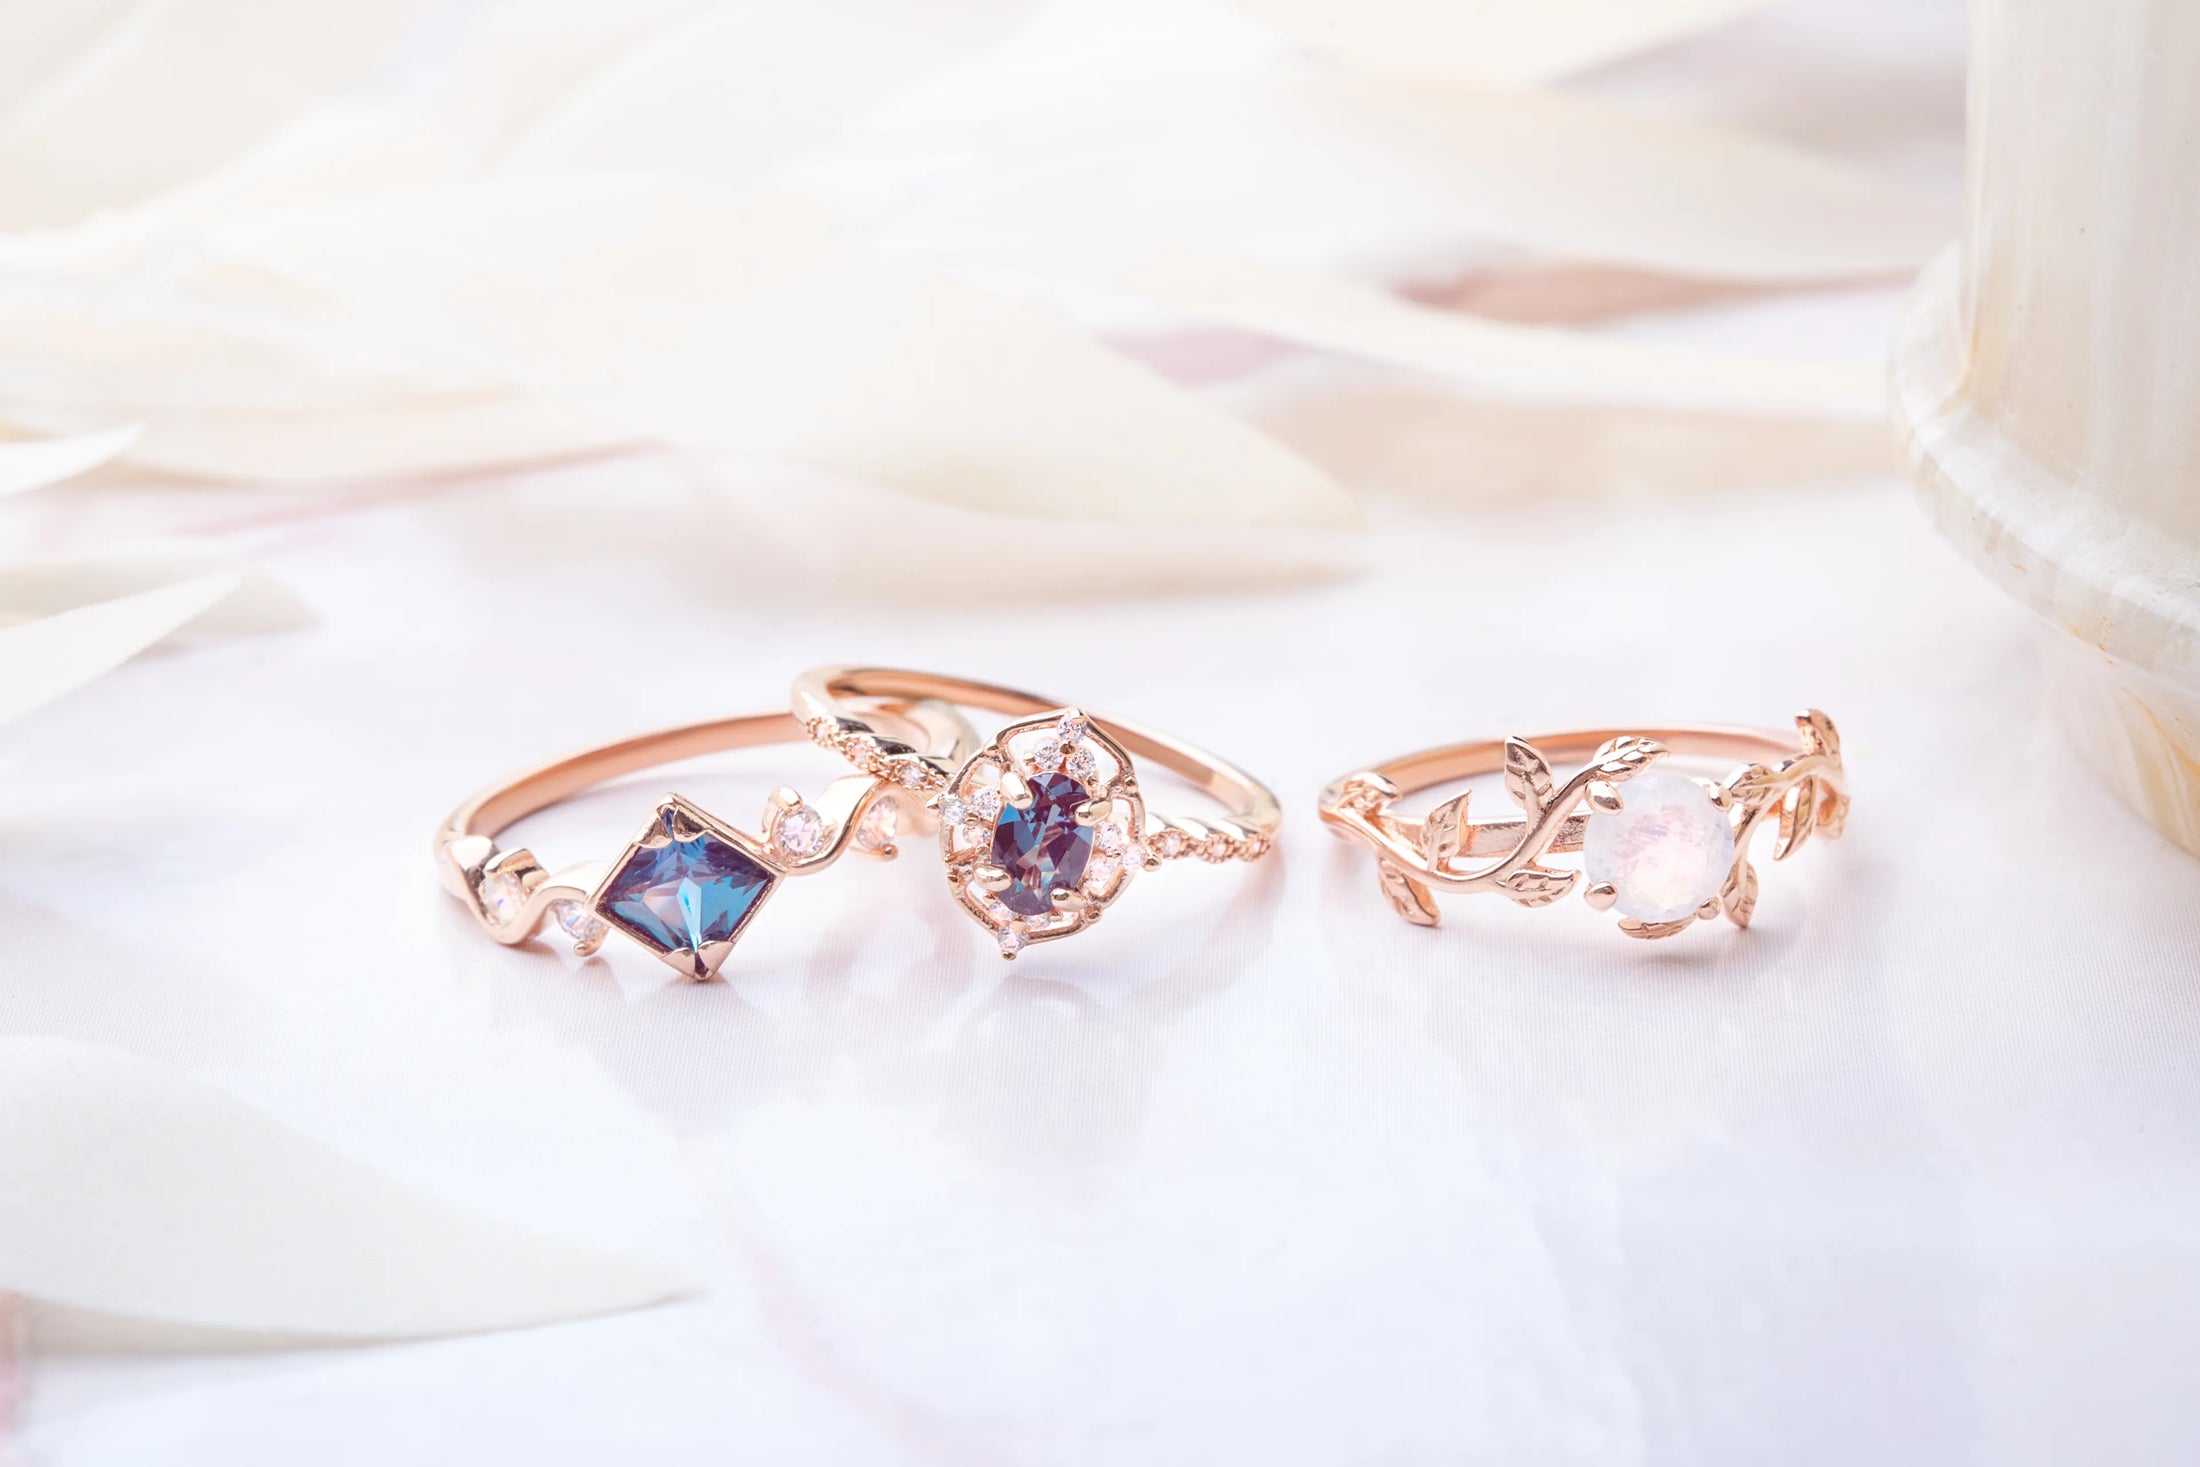 Three gold plated rings from Tenderness collection. Each ring has different gemstone, two rings have alexandrite and one ring has opal